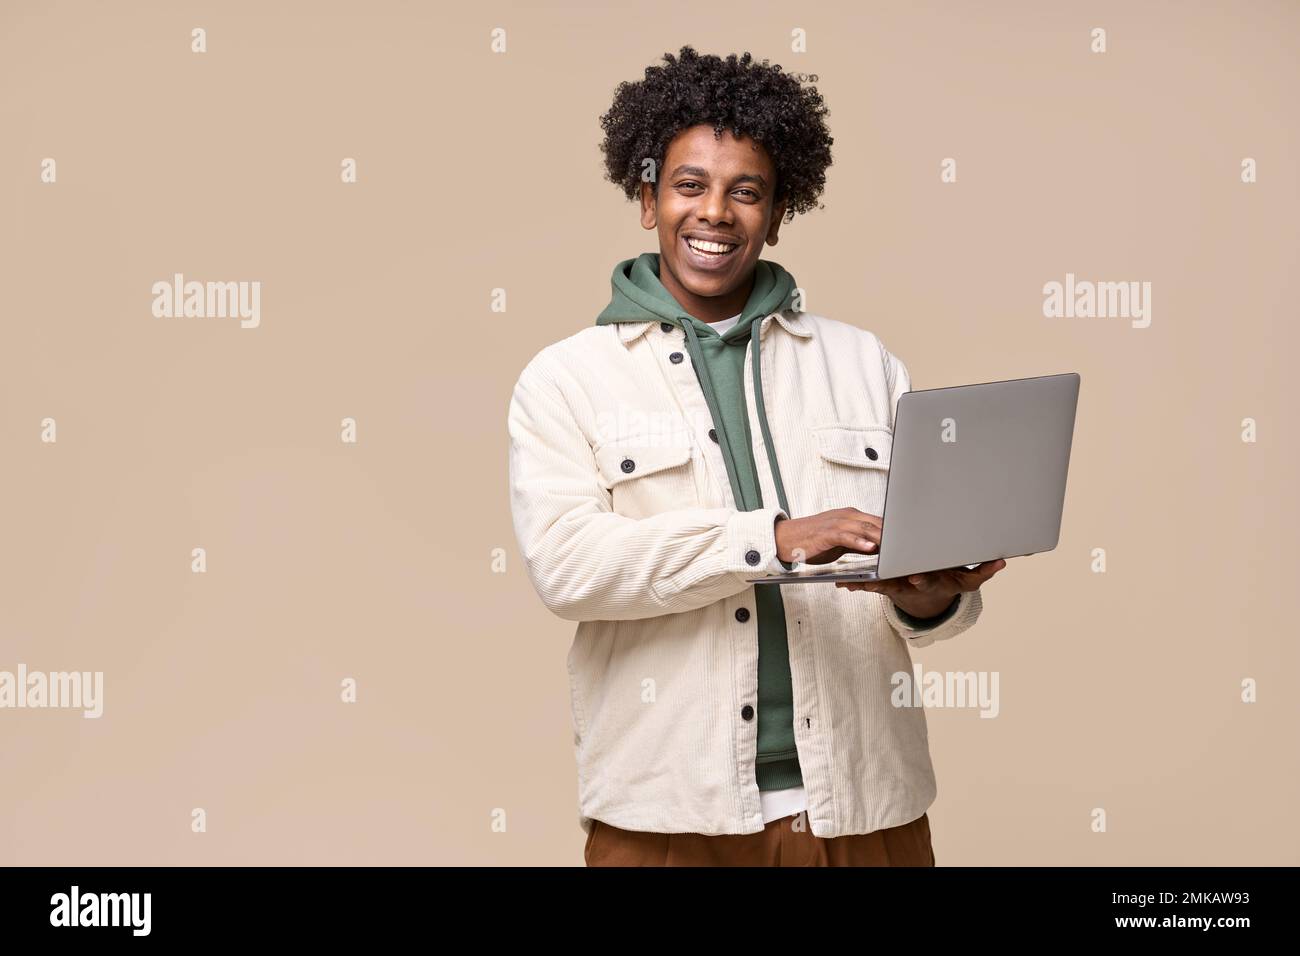 Happy African student holding using laptop isolated on beige background. Stock Photo